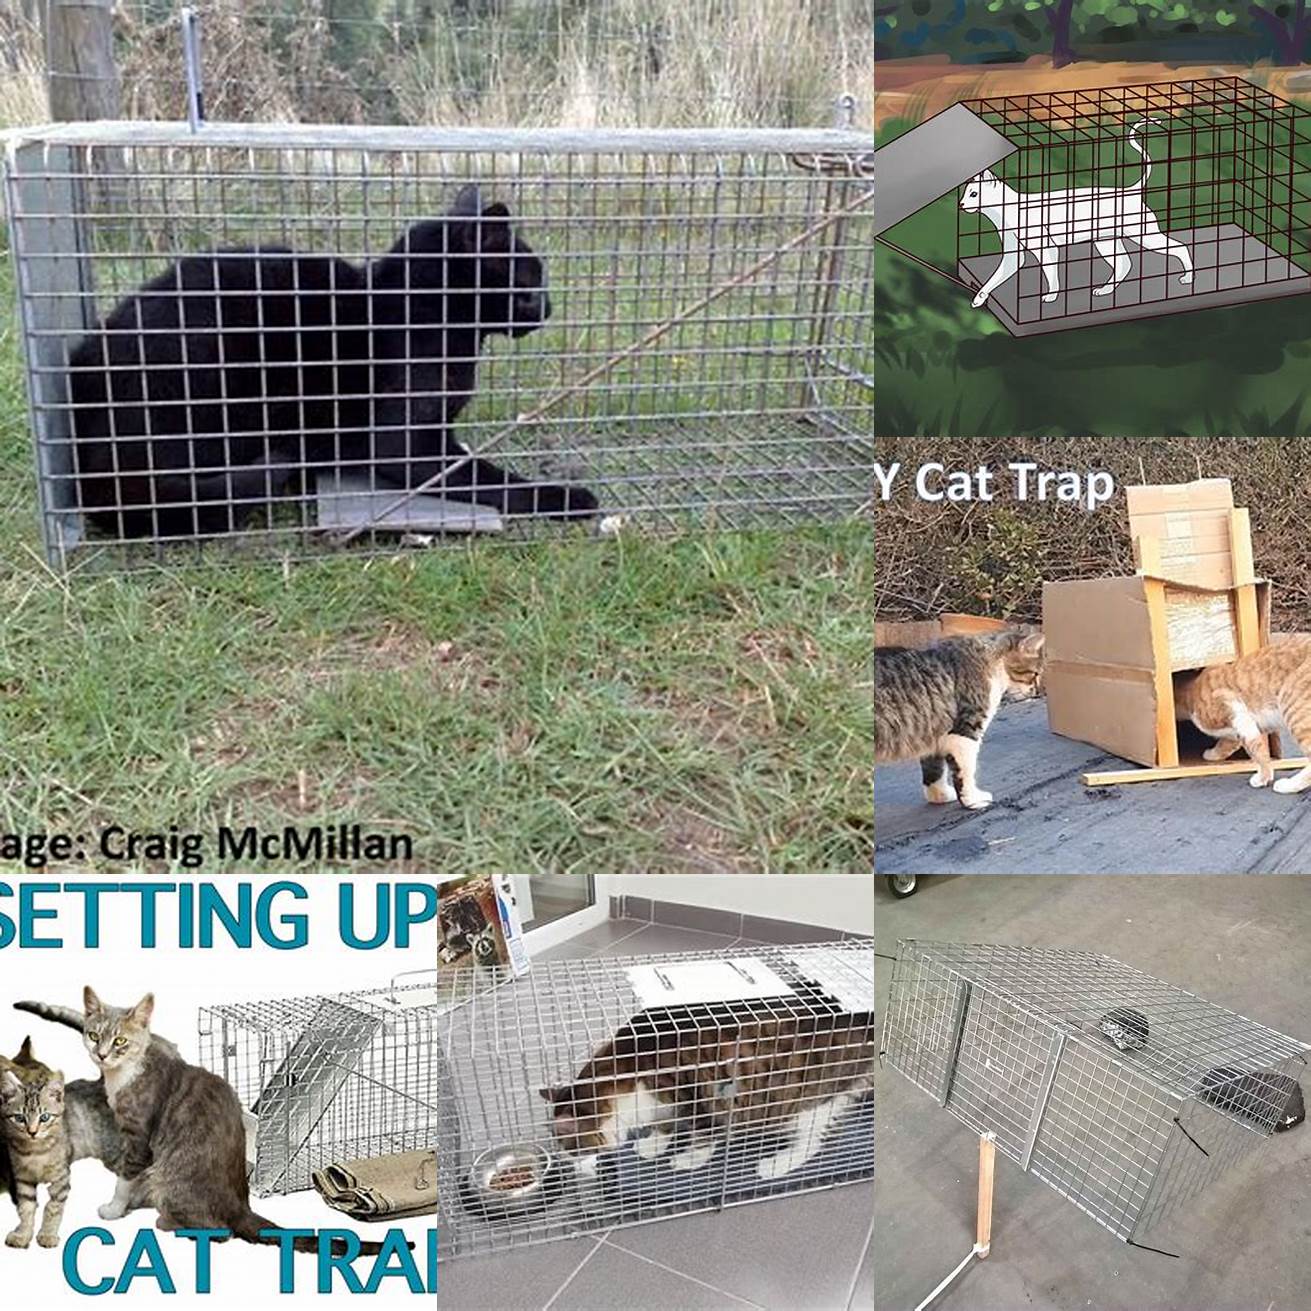 Set up a trap If your cat is hiding nearby you can set up a trap to catch them